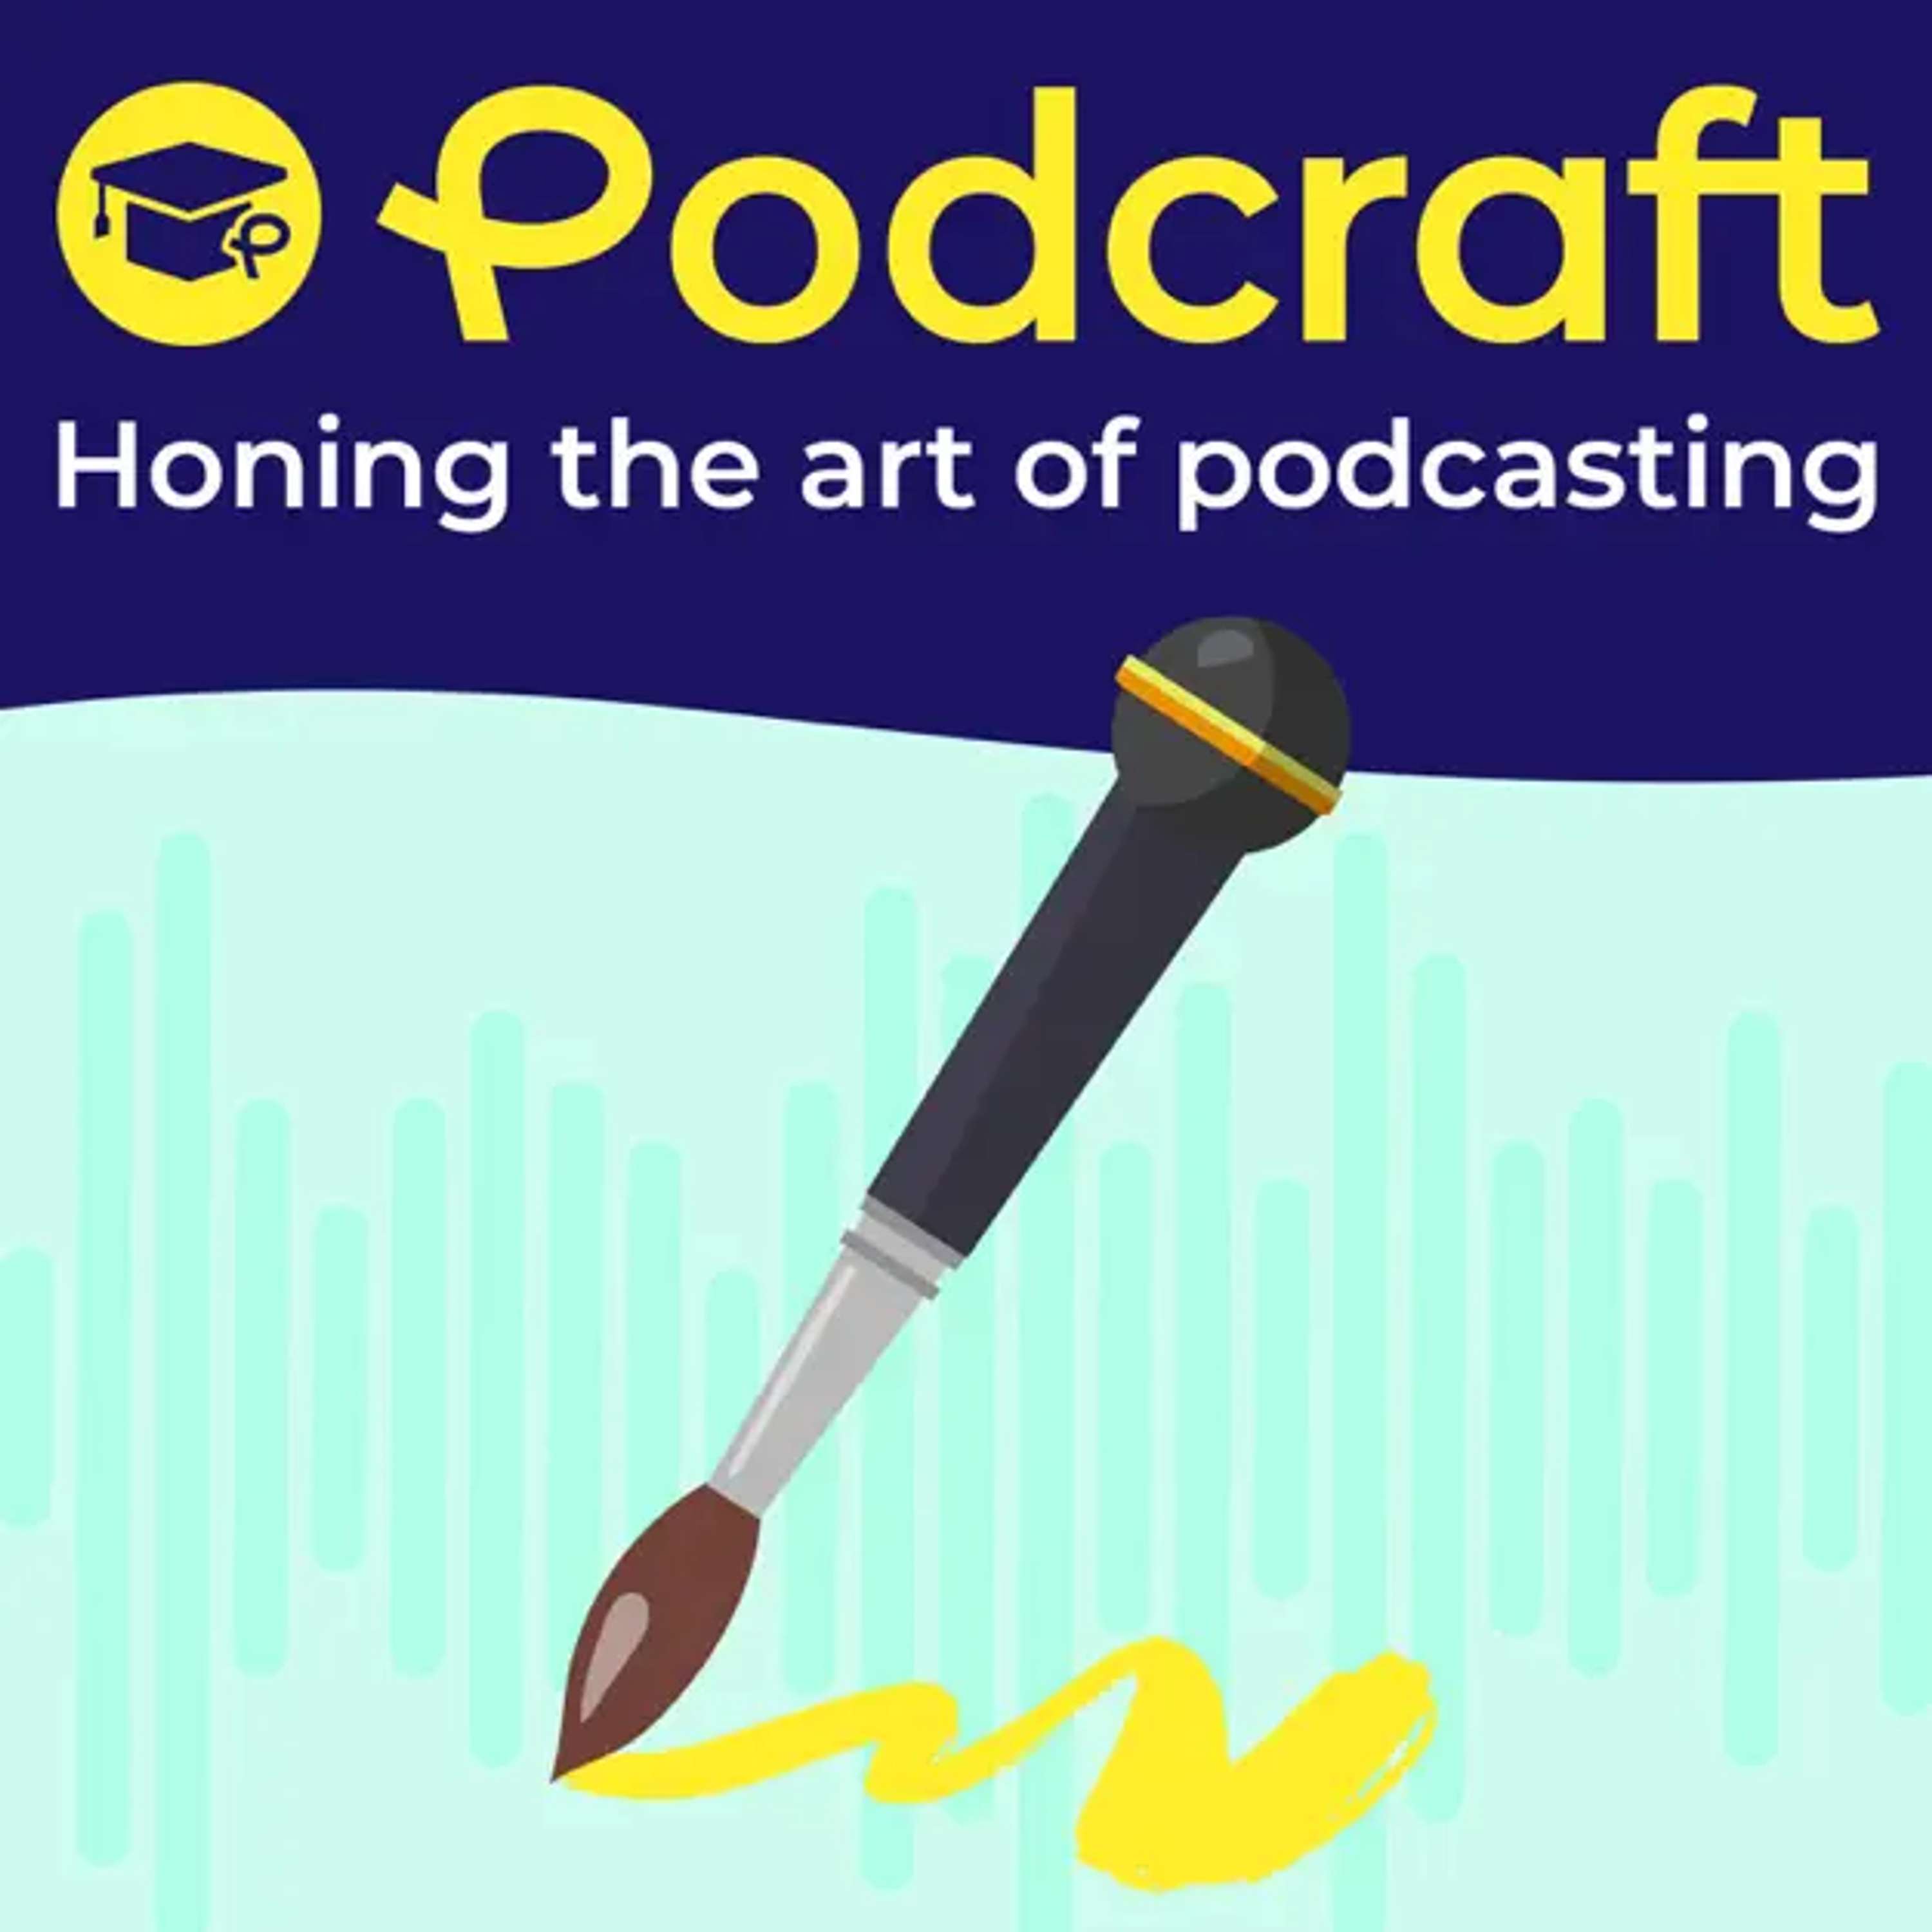 From Doubt to Determination: Pushing Through the Podcasting Dip [Podcraft]